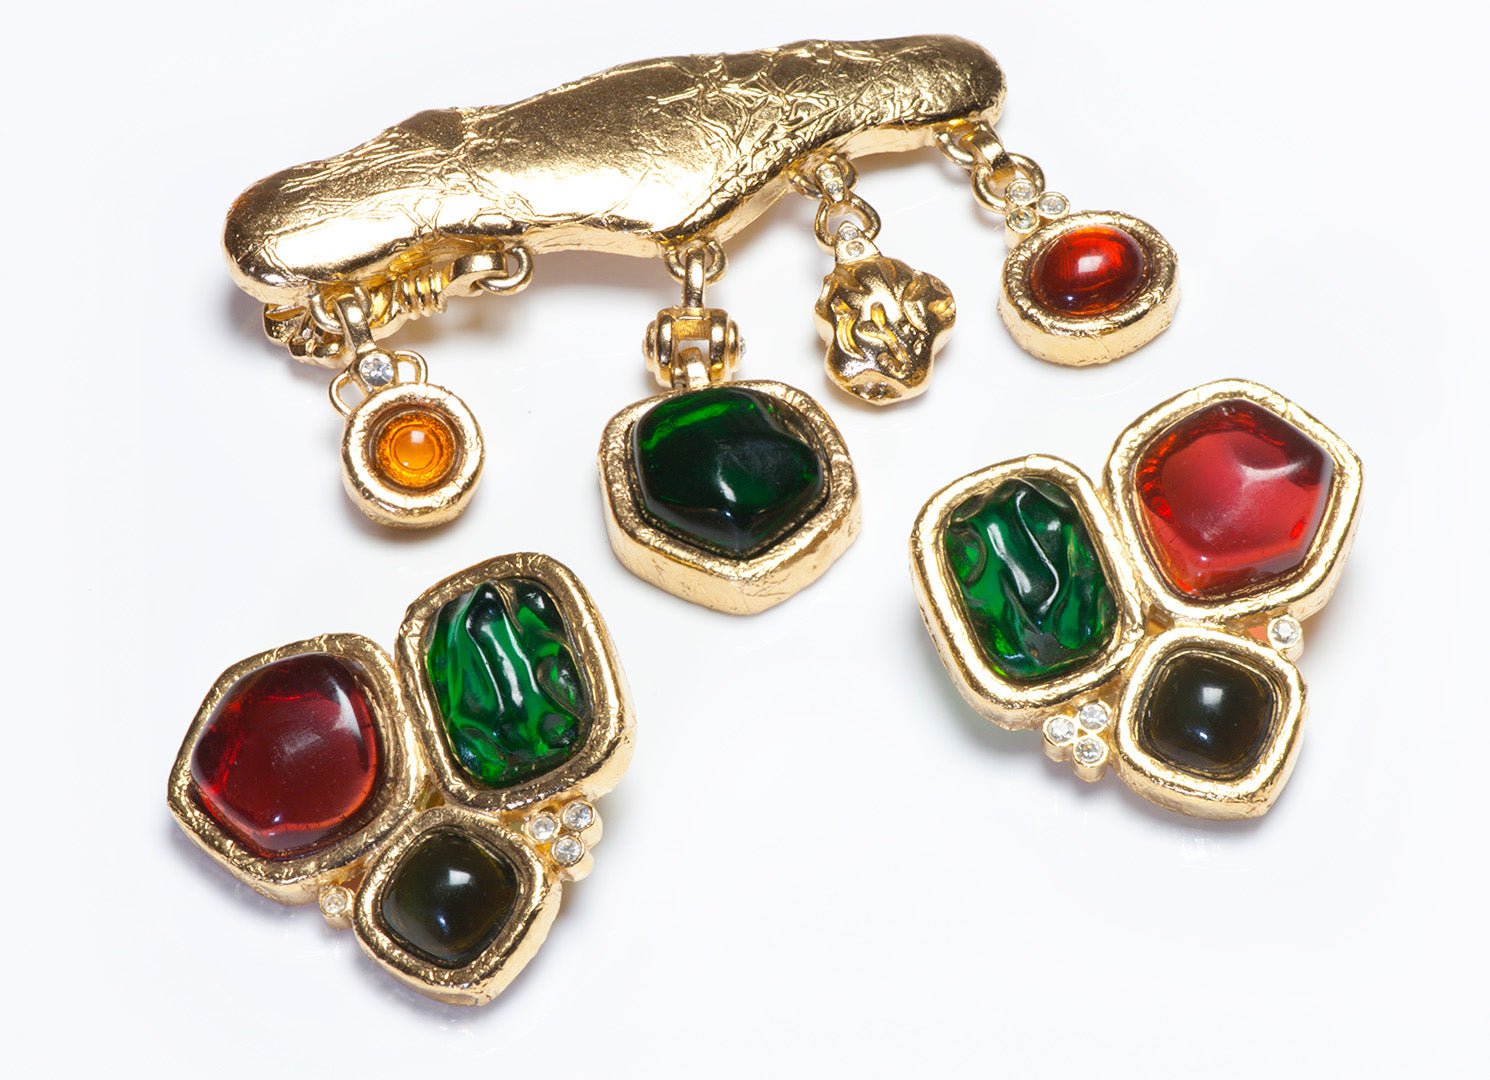 Vintage Givenchy Paris Red Green Cabochon Crystal Charm Brooch Earrings Set